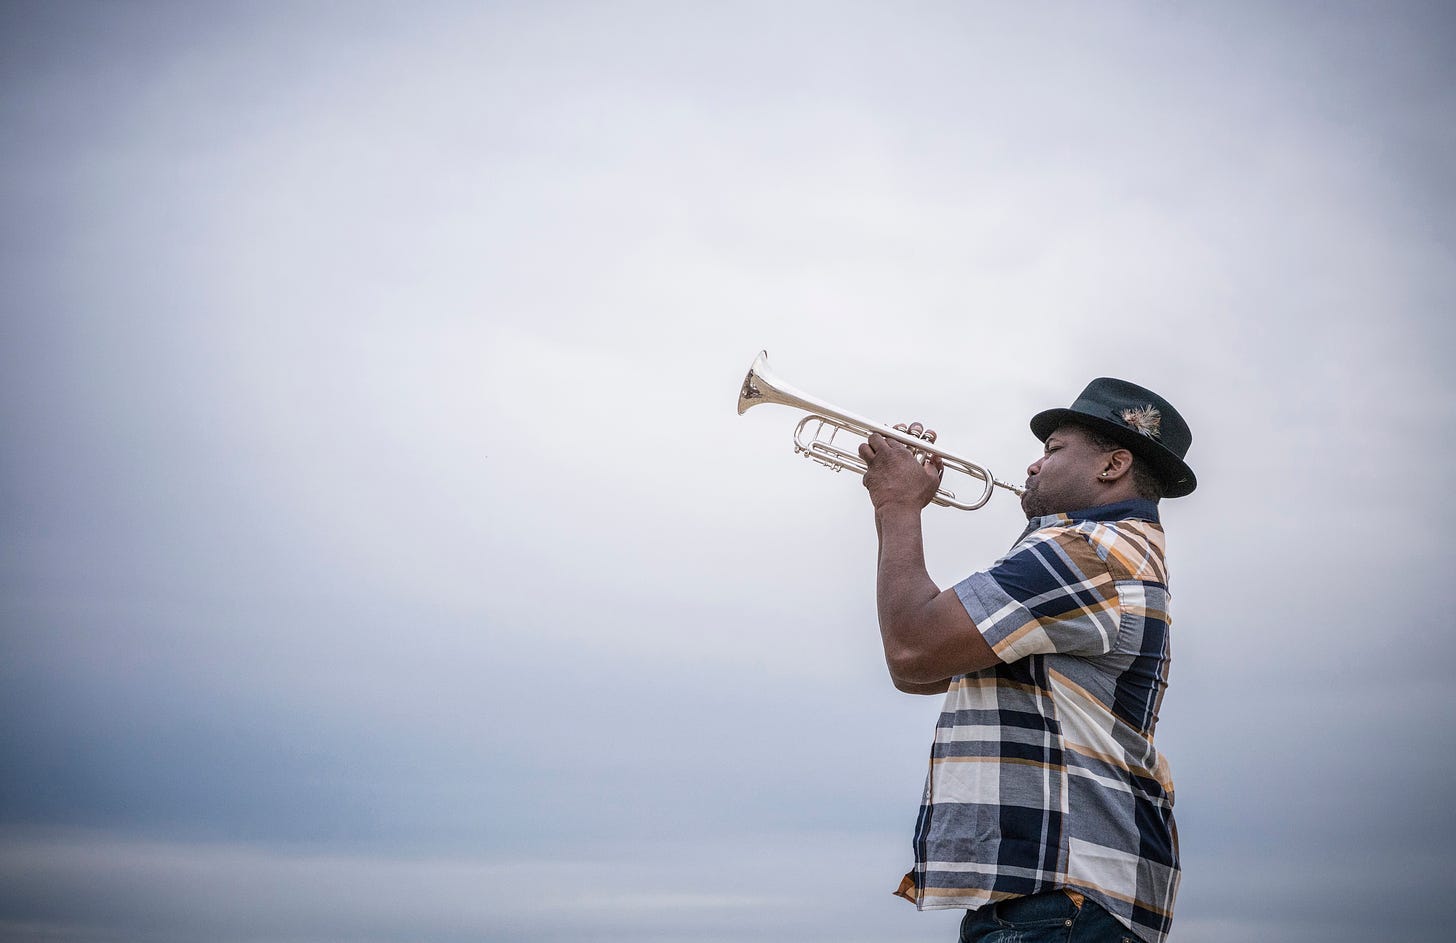 Man in hat playing a trumpet